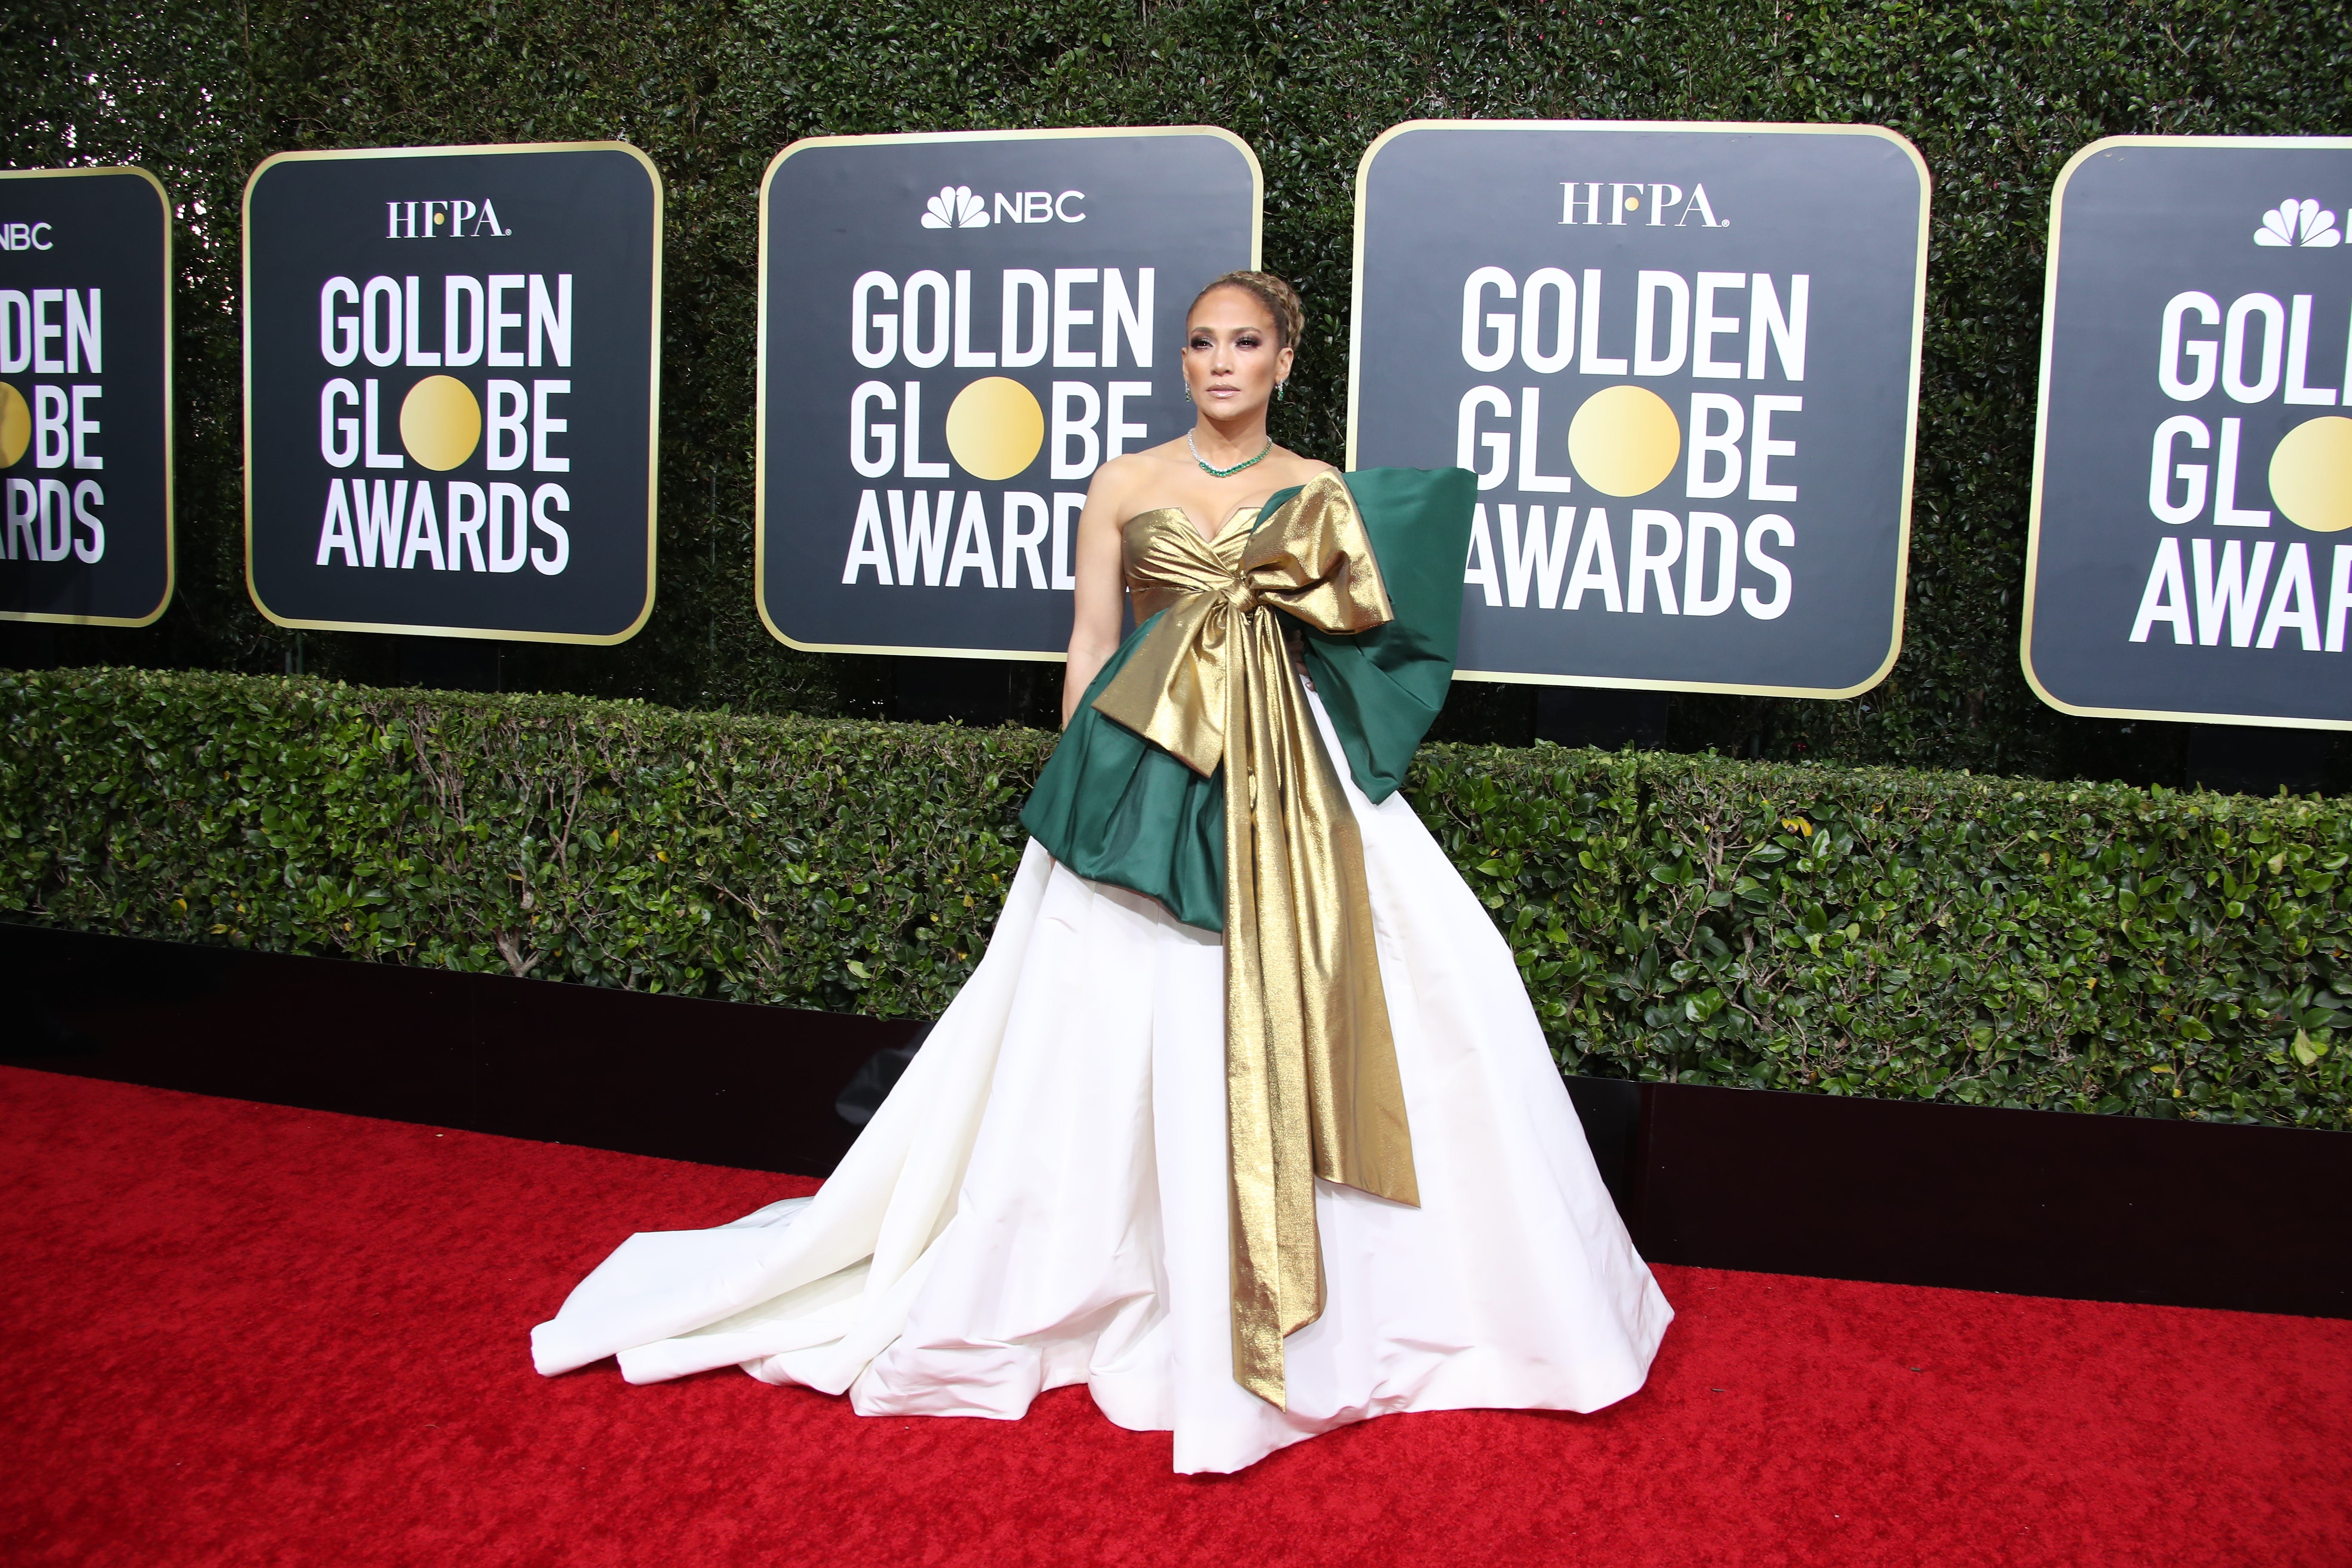 worst dressed at the golden globes 2019